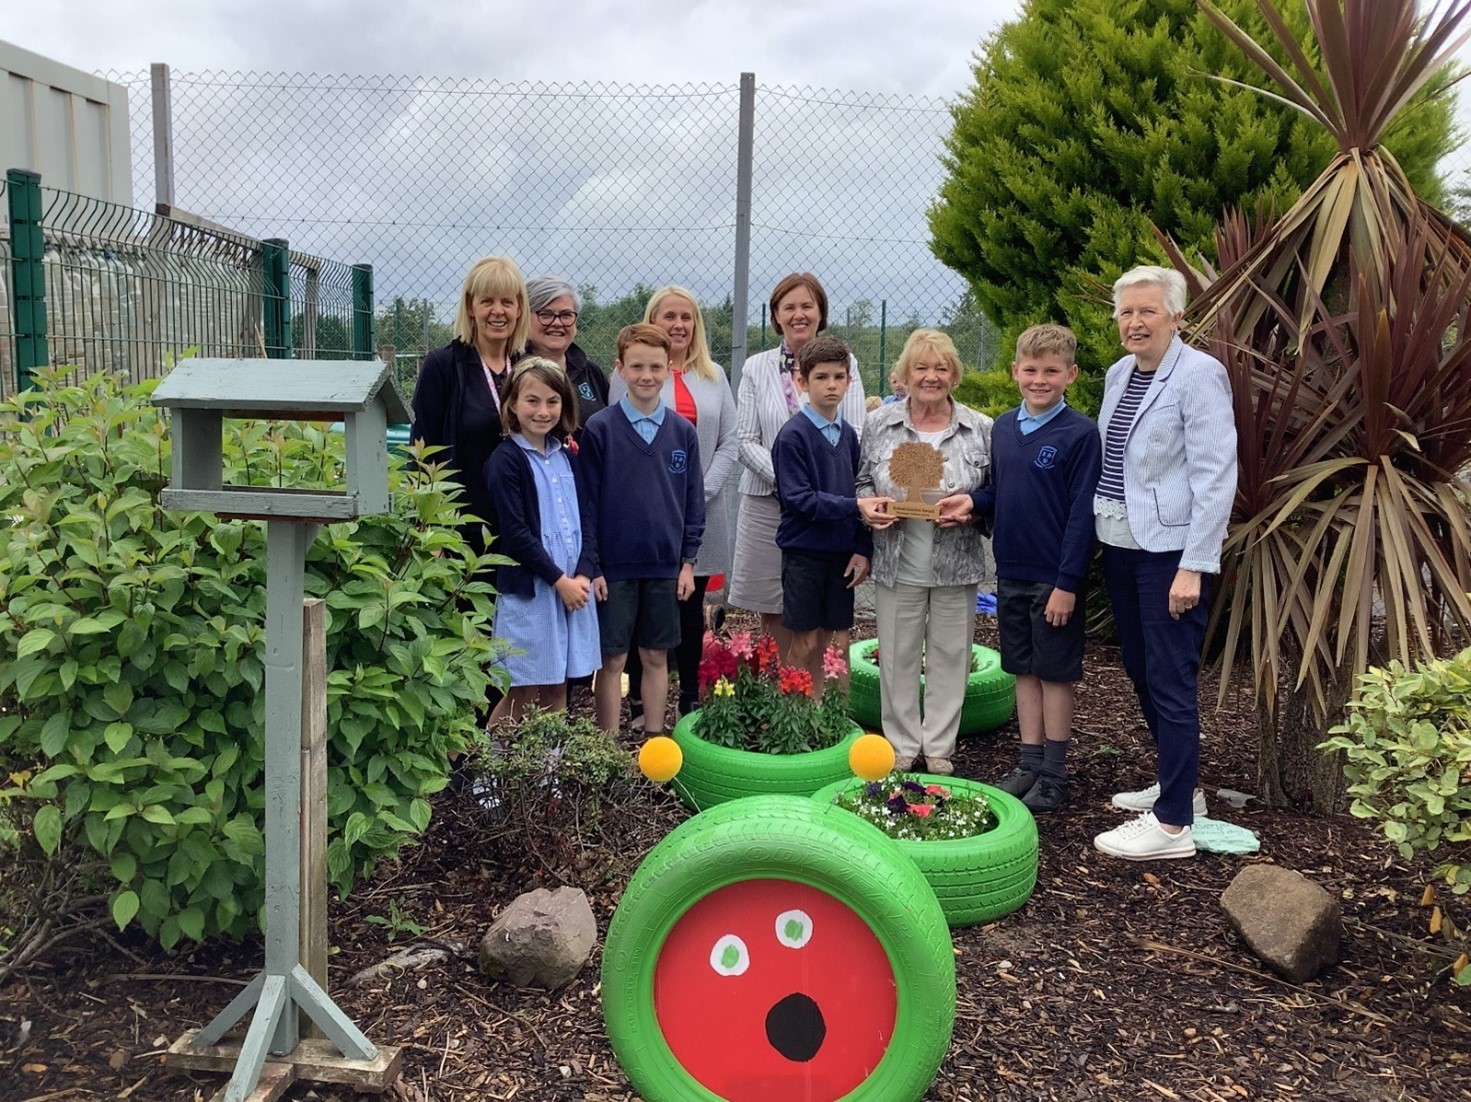 Irvinestown PS: Blooming great show by young pupil gardeners